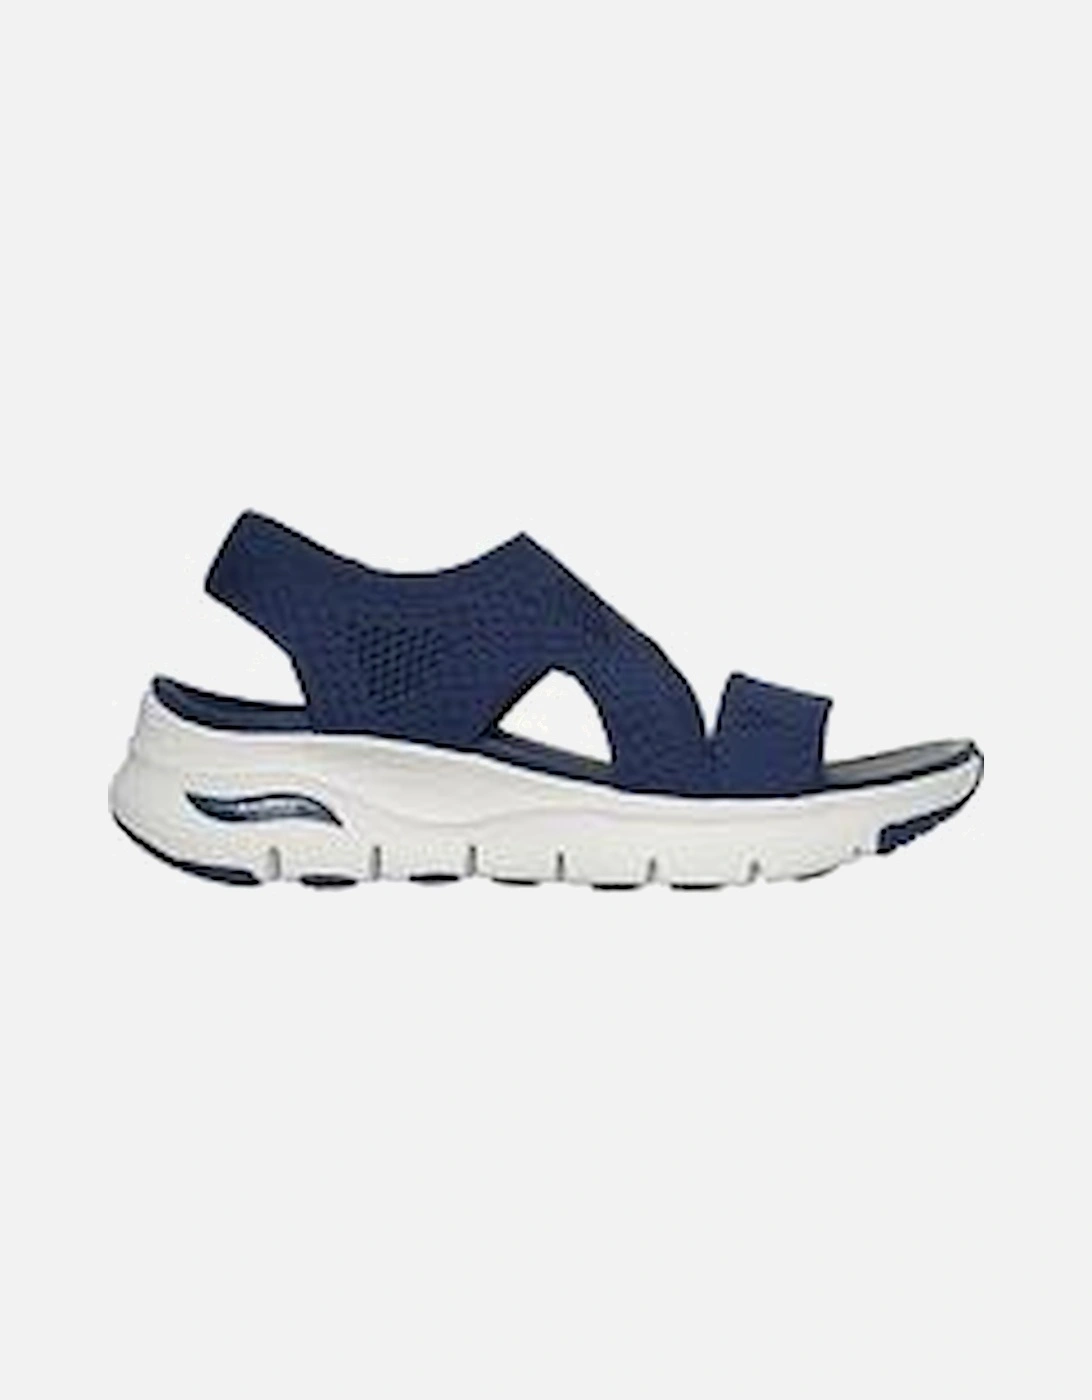 119458 Arch Fit Brightest Day sandal in Navy, 2 of 1